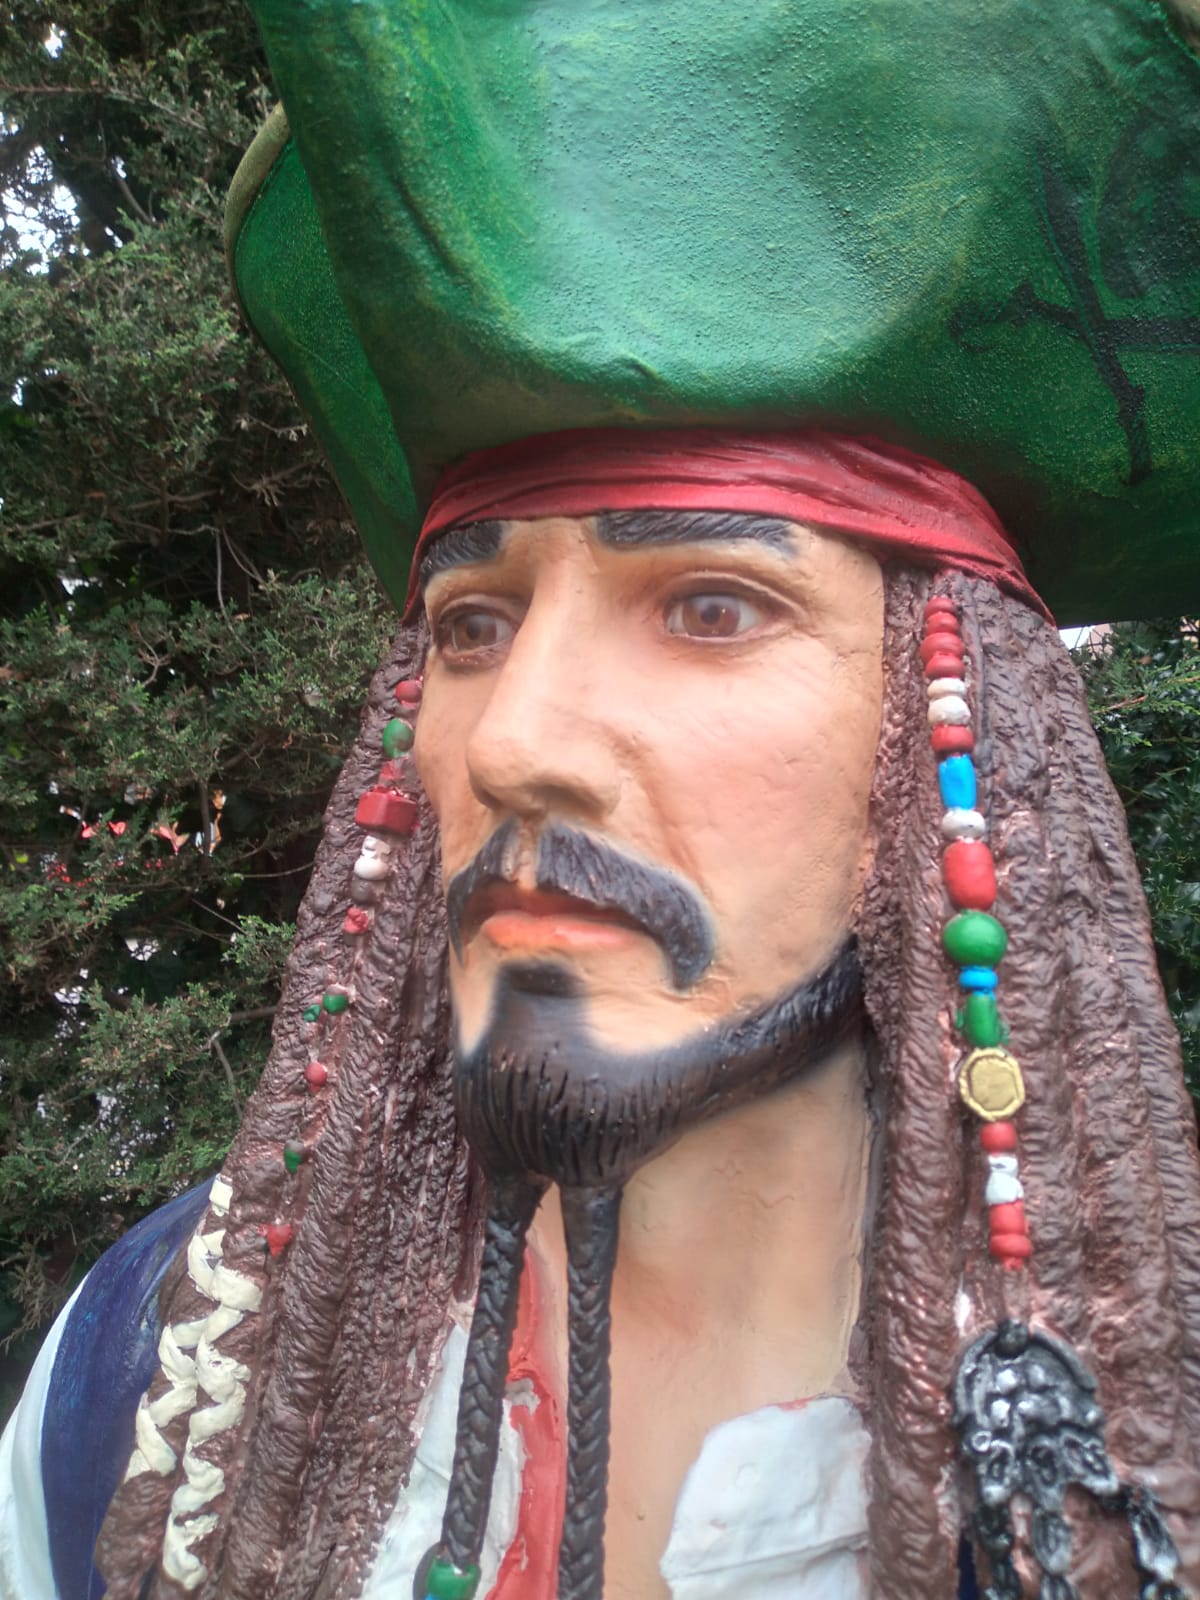 Cinema - Rare Statue of the Caribbean pirate Jack Sparr - Image 6 of 11